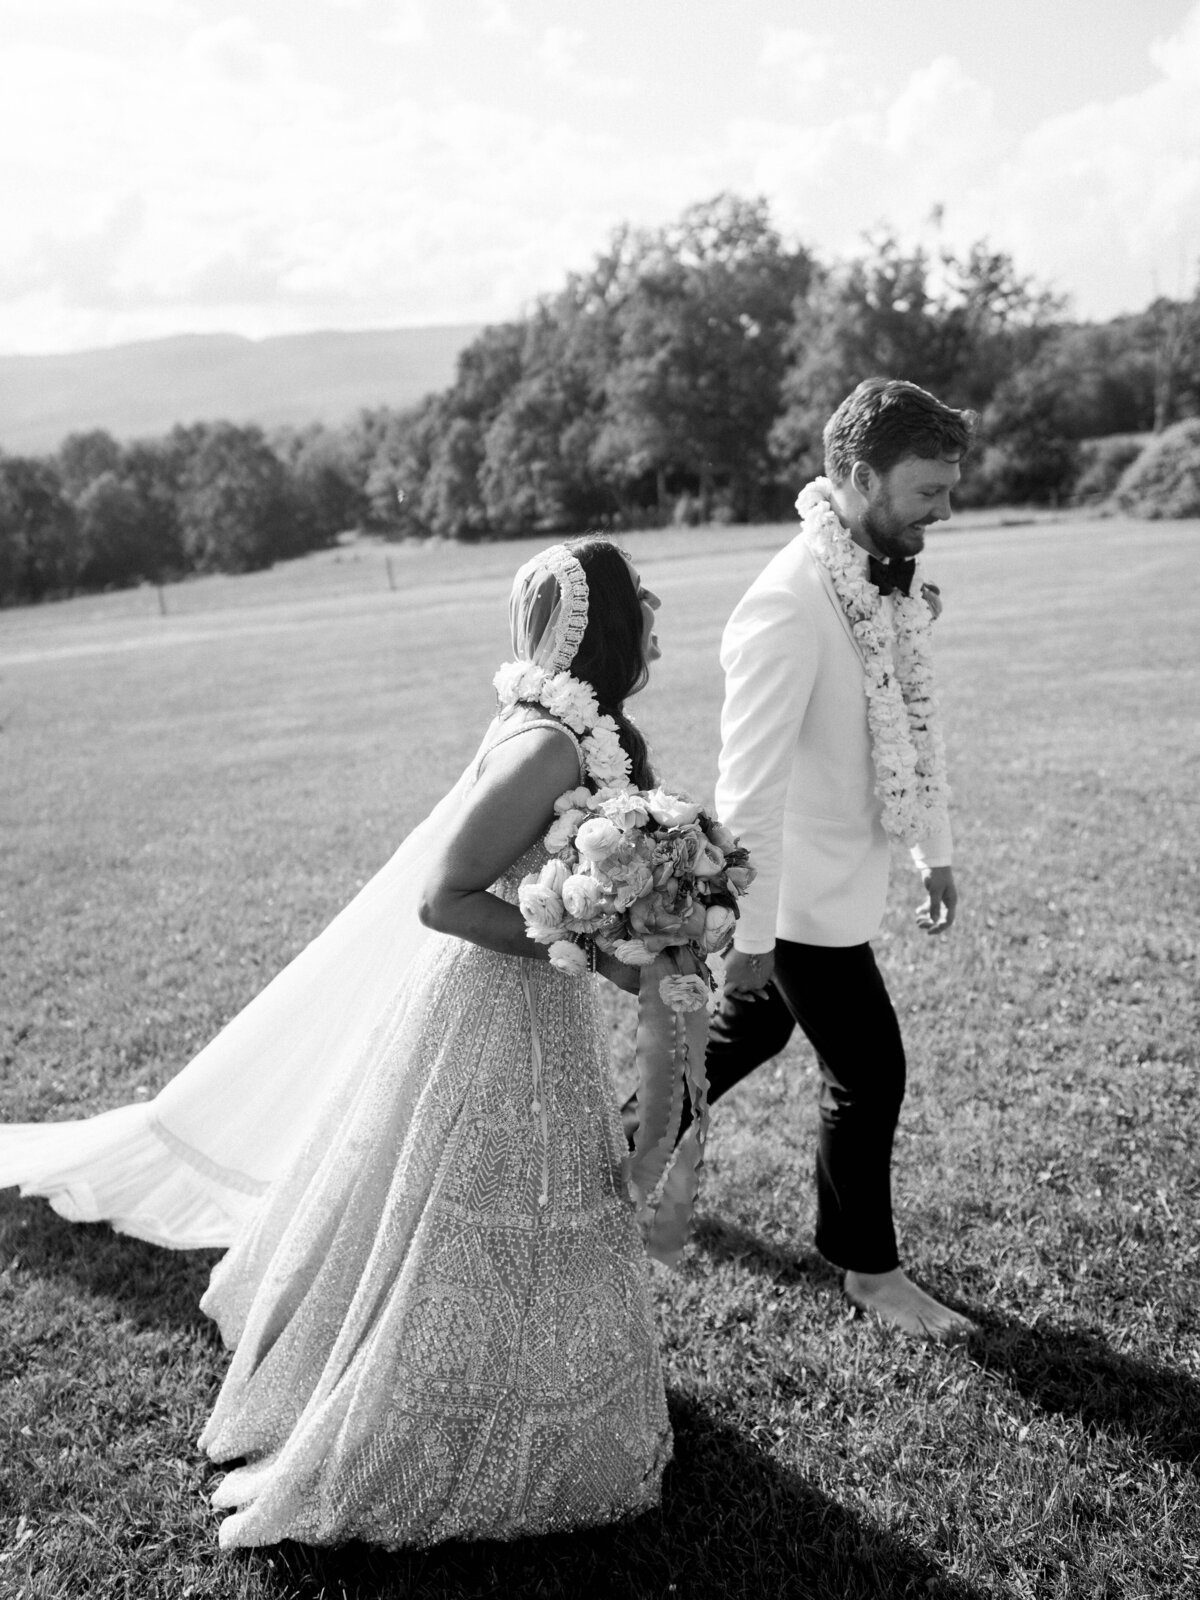 Liz Andolina Photography Destination Wedding Photographer in Italy, New York, Across the East Coast Editorial, heritage-quality images for stylish couples-766